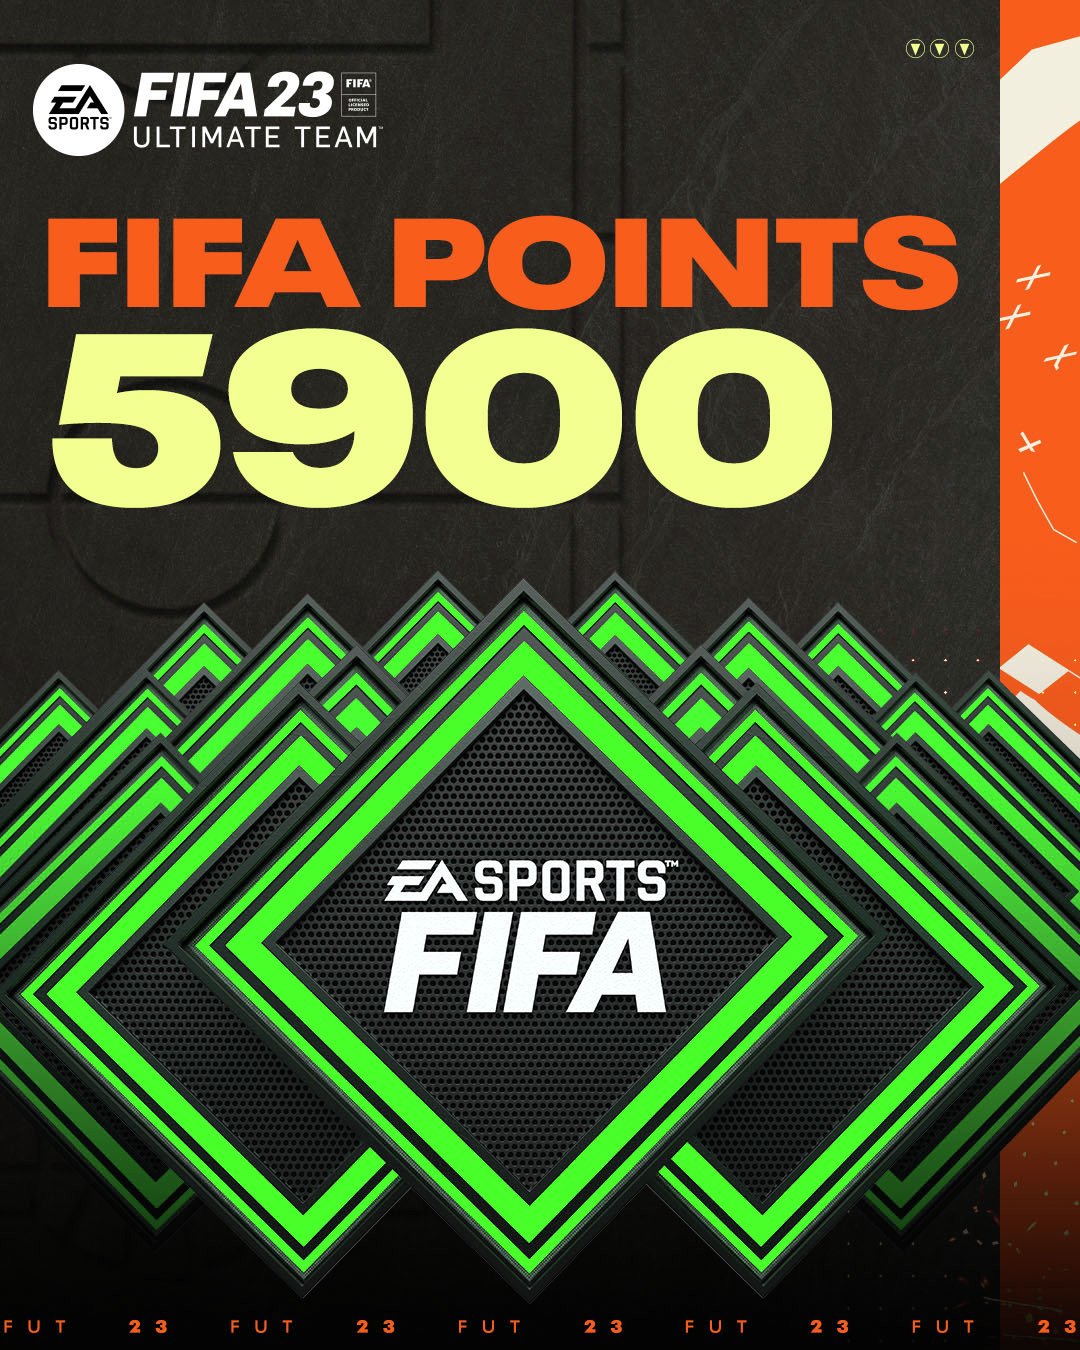 FIFA 23 Ultimate Team - 5900 FIFA Points - PC